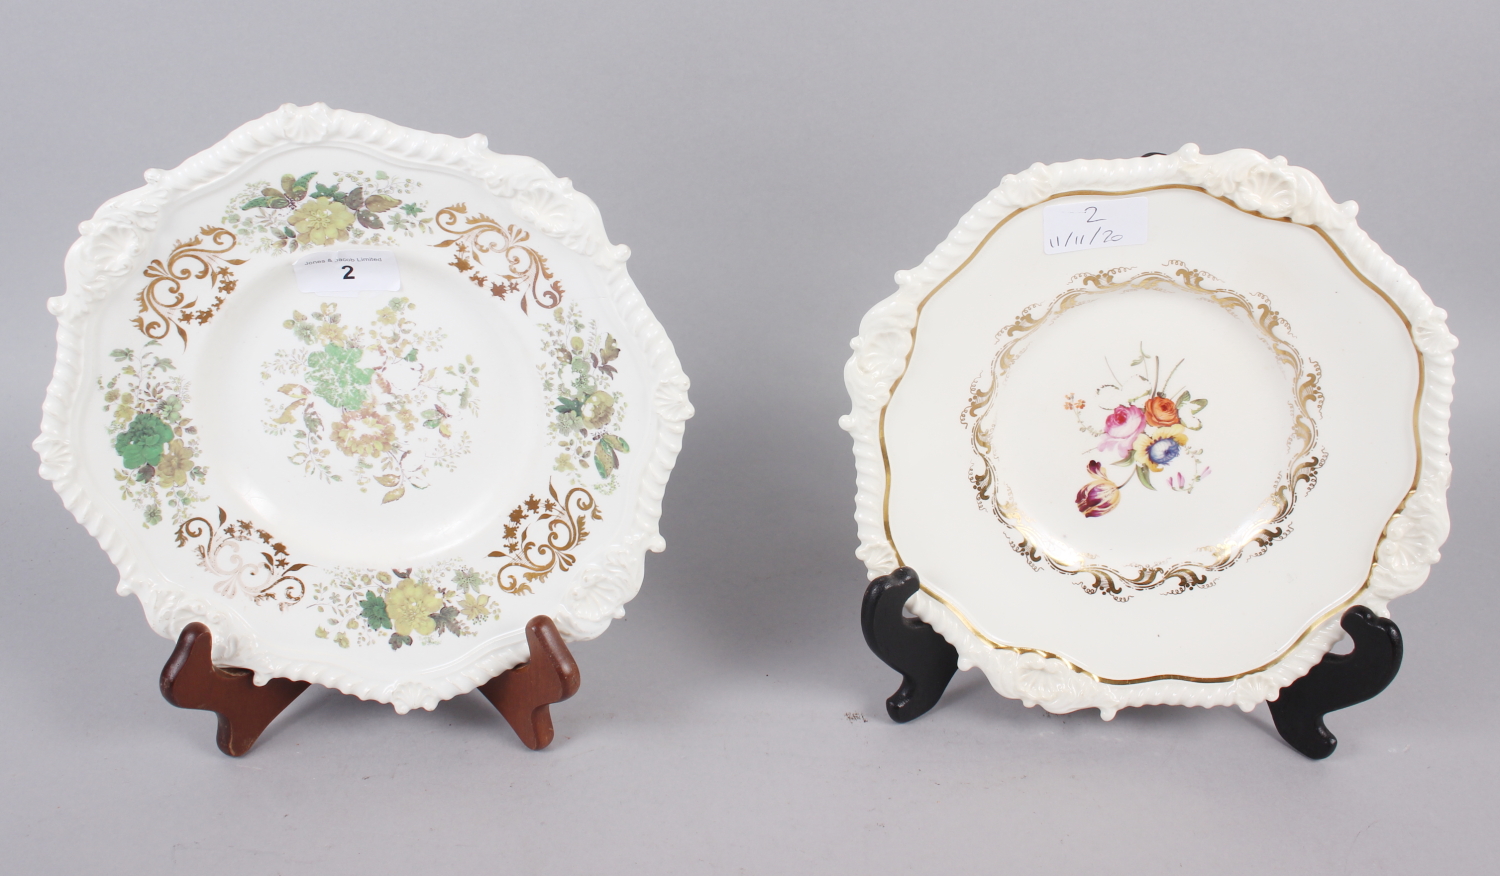 A Rockingham tureen stand, decorated ornate shell and gadroon border, centre painted floral